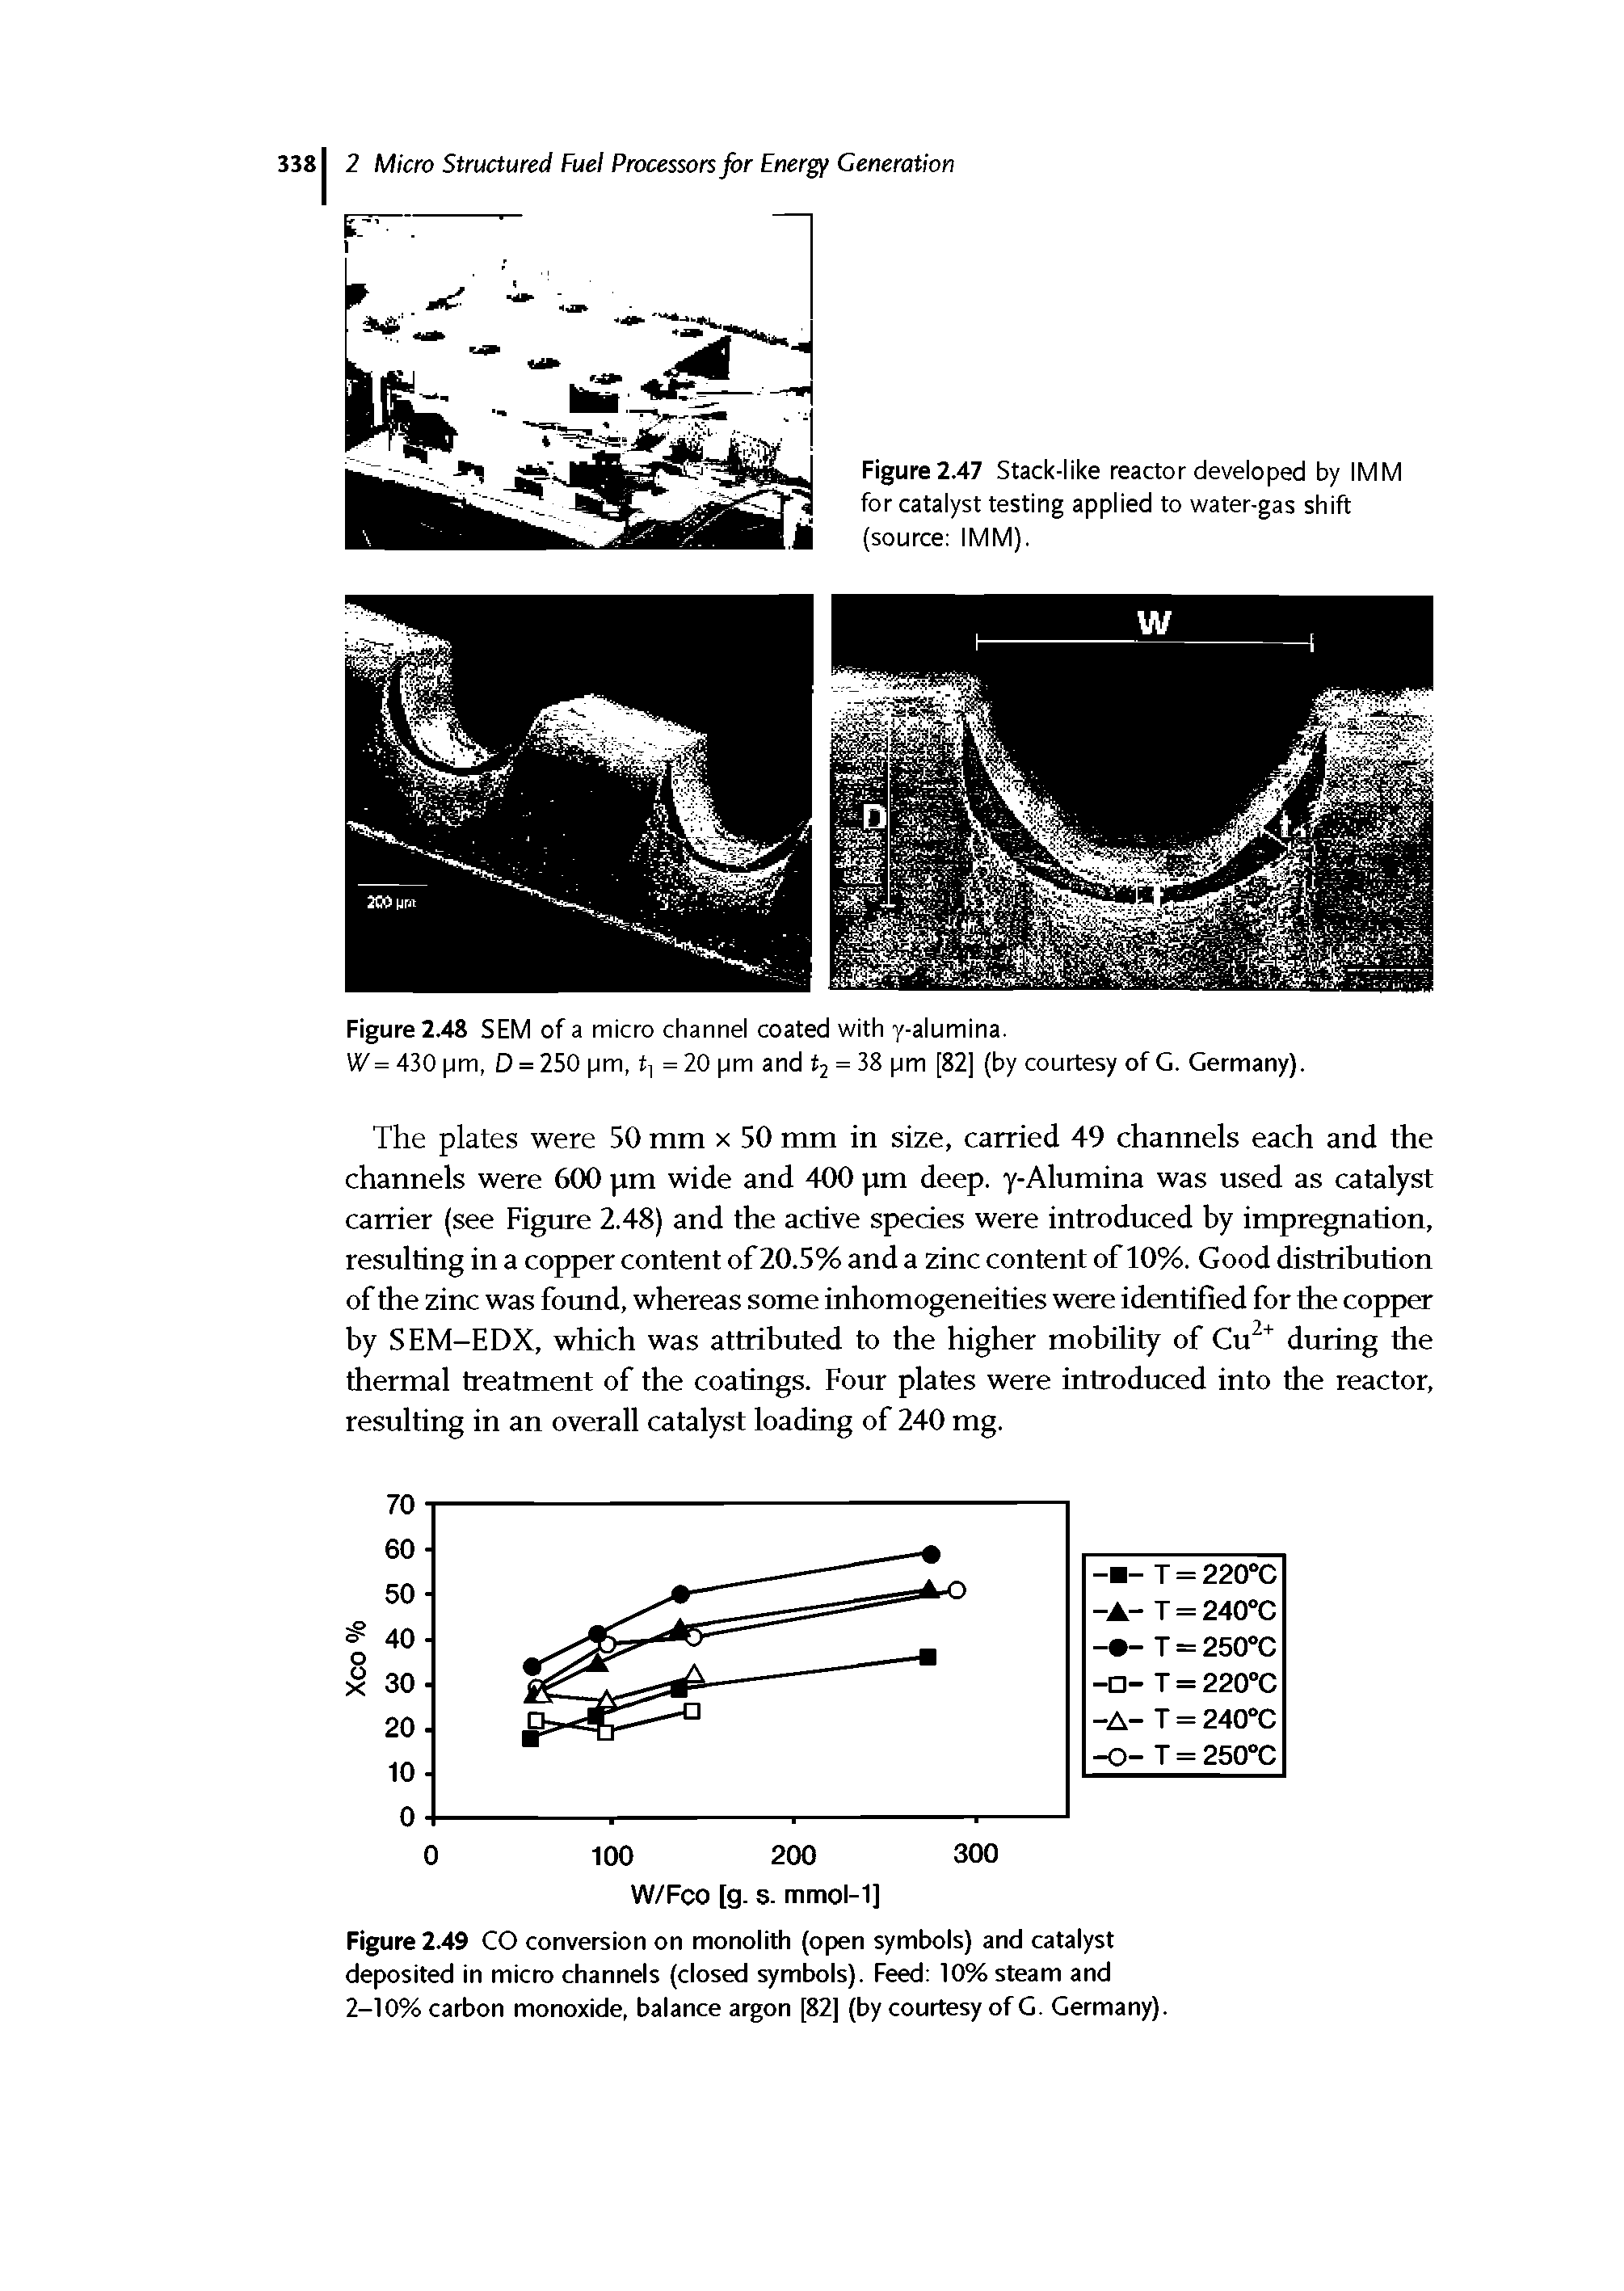 Figure 2.49 CO conversion on monolith (open symbols) and catalyst deposited in micro channels (closed symbols). Feed 10% steam and 2-10% carbon monoxide, balance argon [82] (by courtesy of G. Germany).